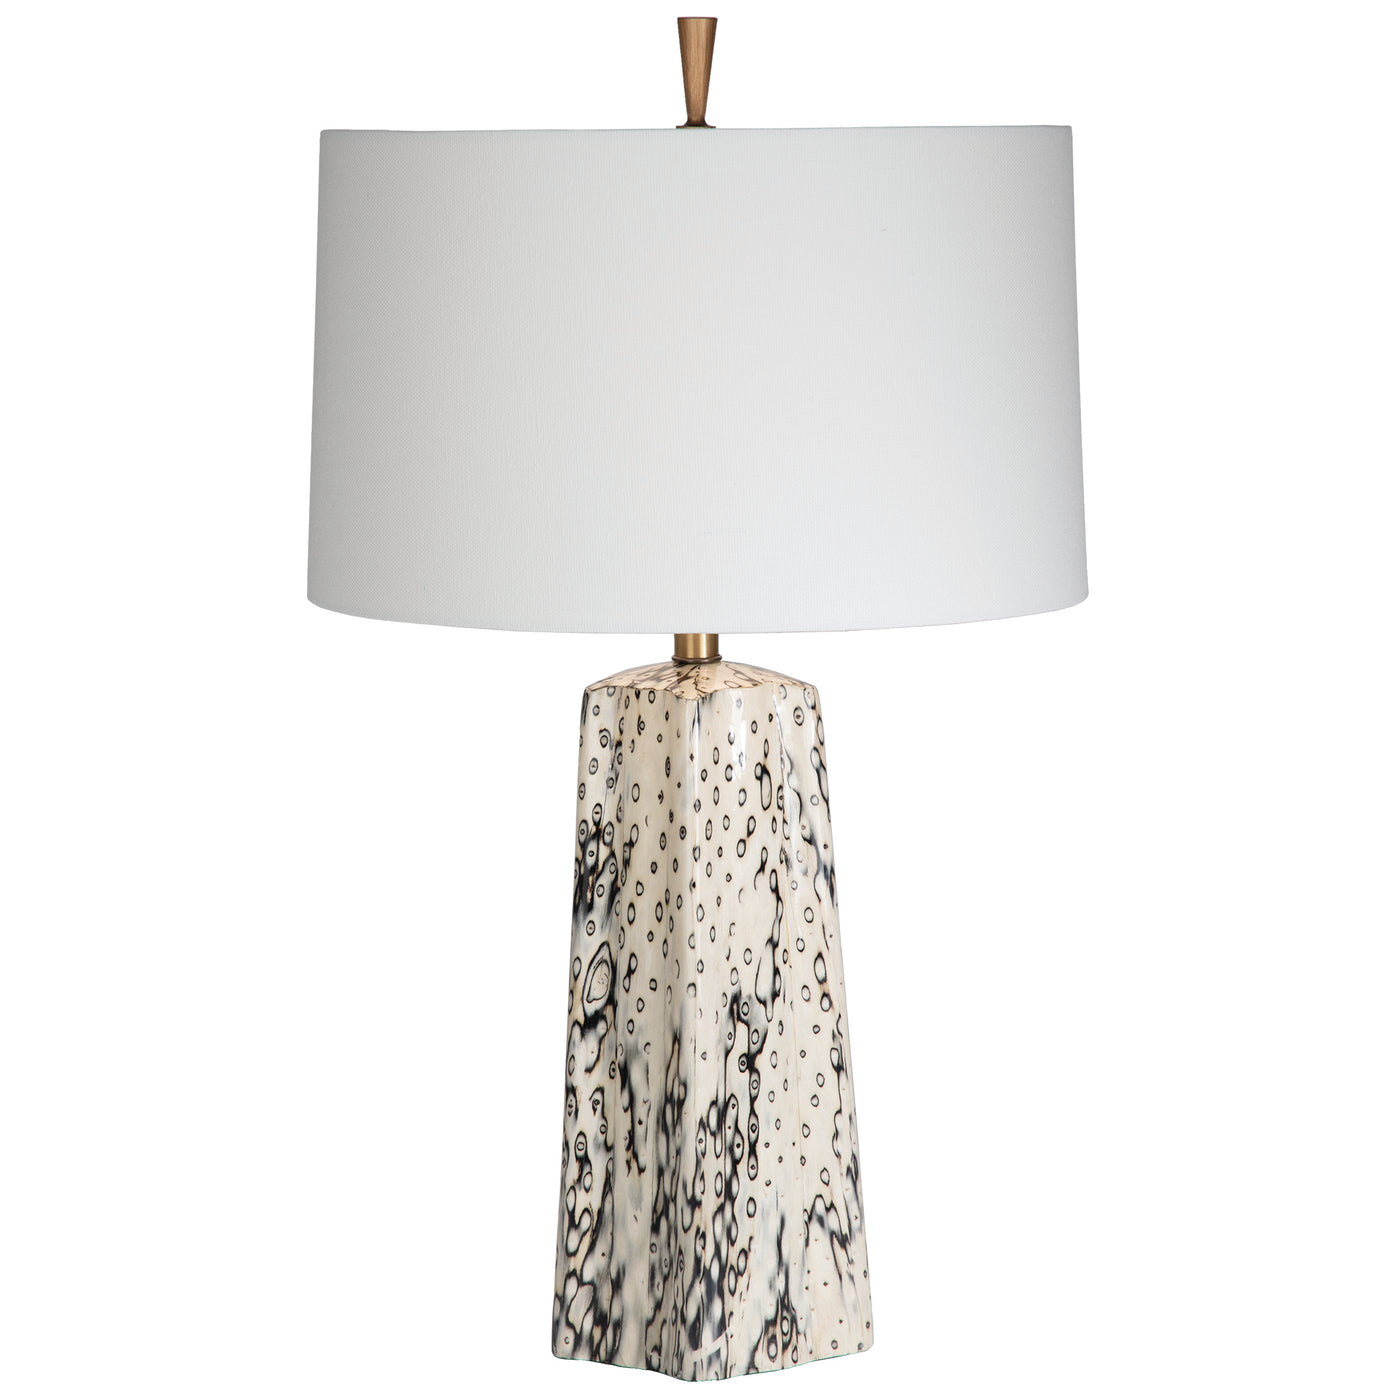 TABLE LAMP SKYVIEW